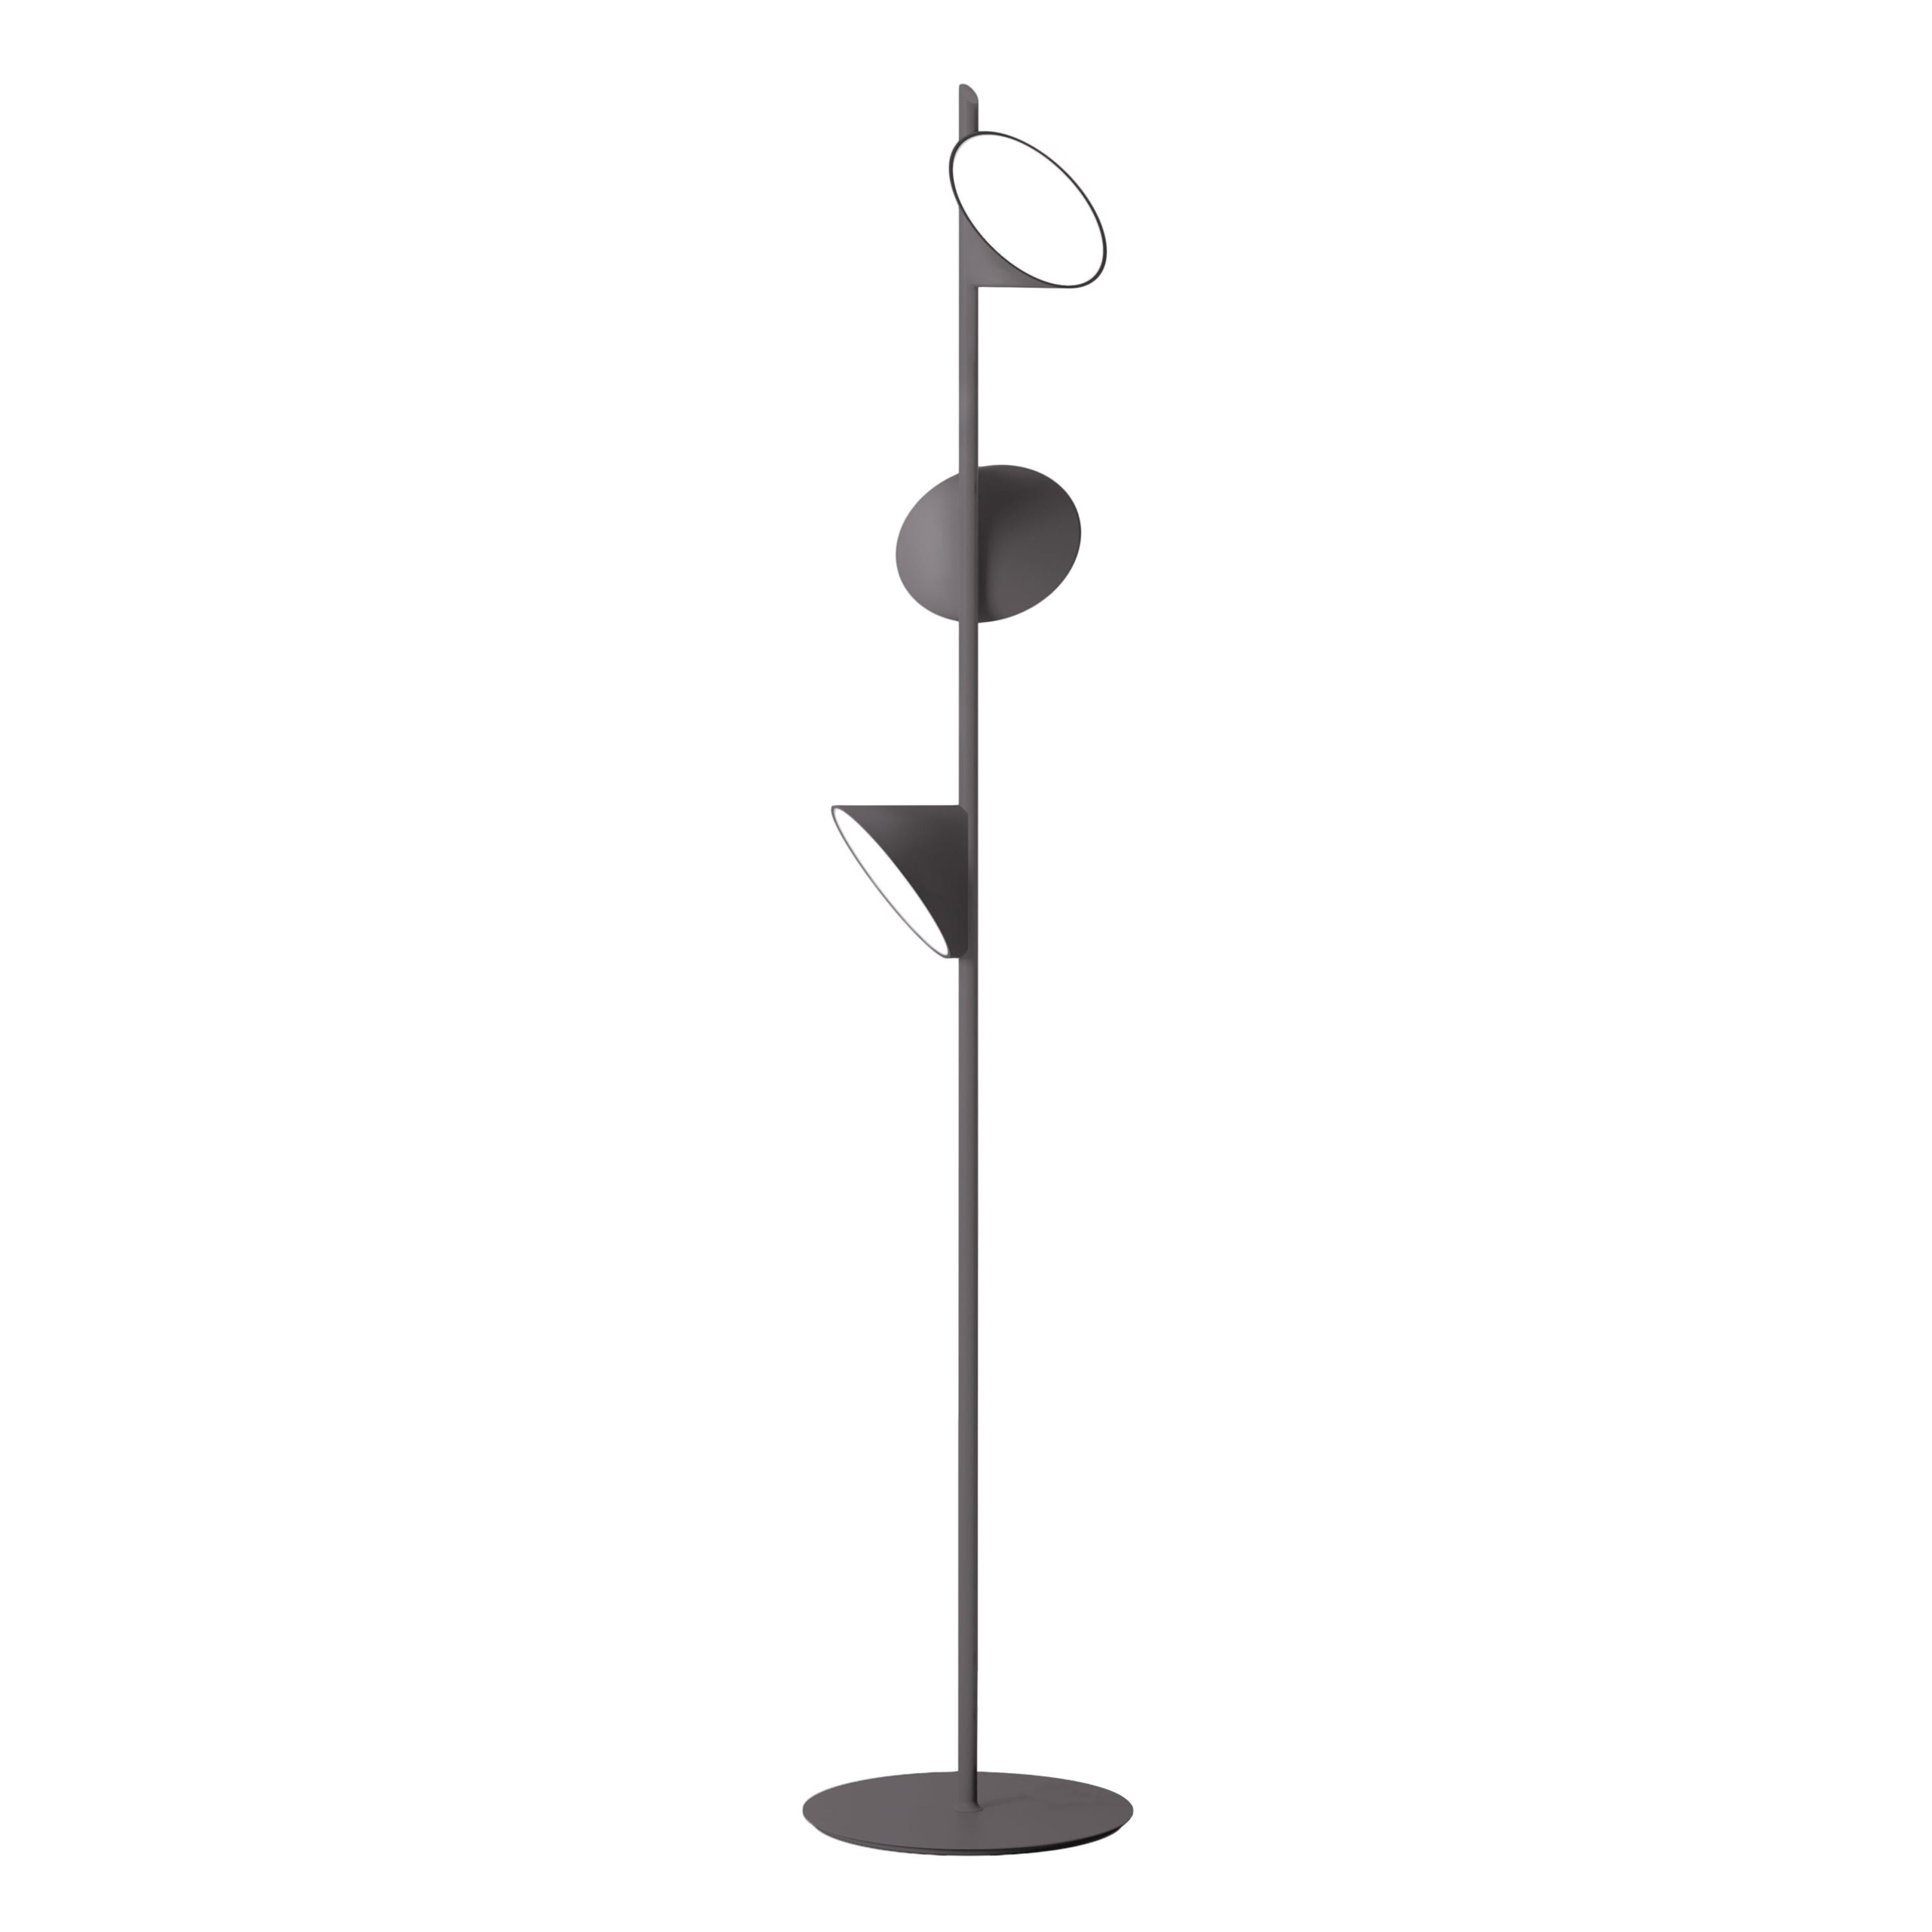 Axolight Orchid Floor Lamp with Aluminum Body in Anthracite Grey For Sale